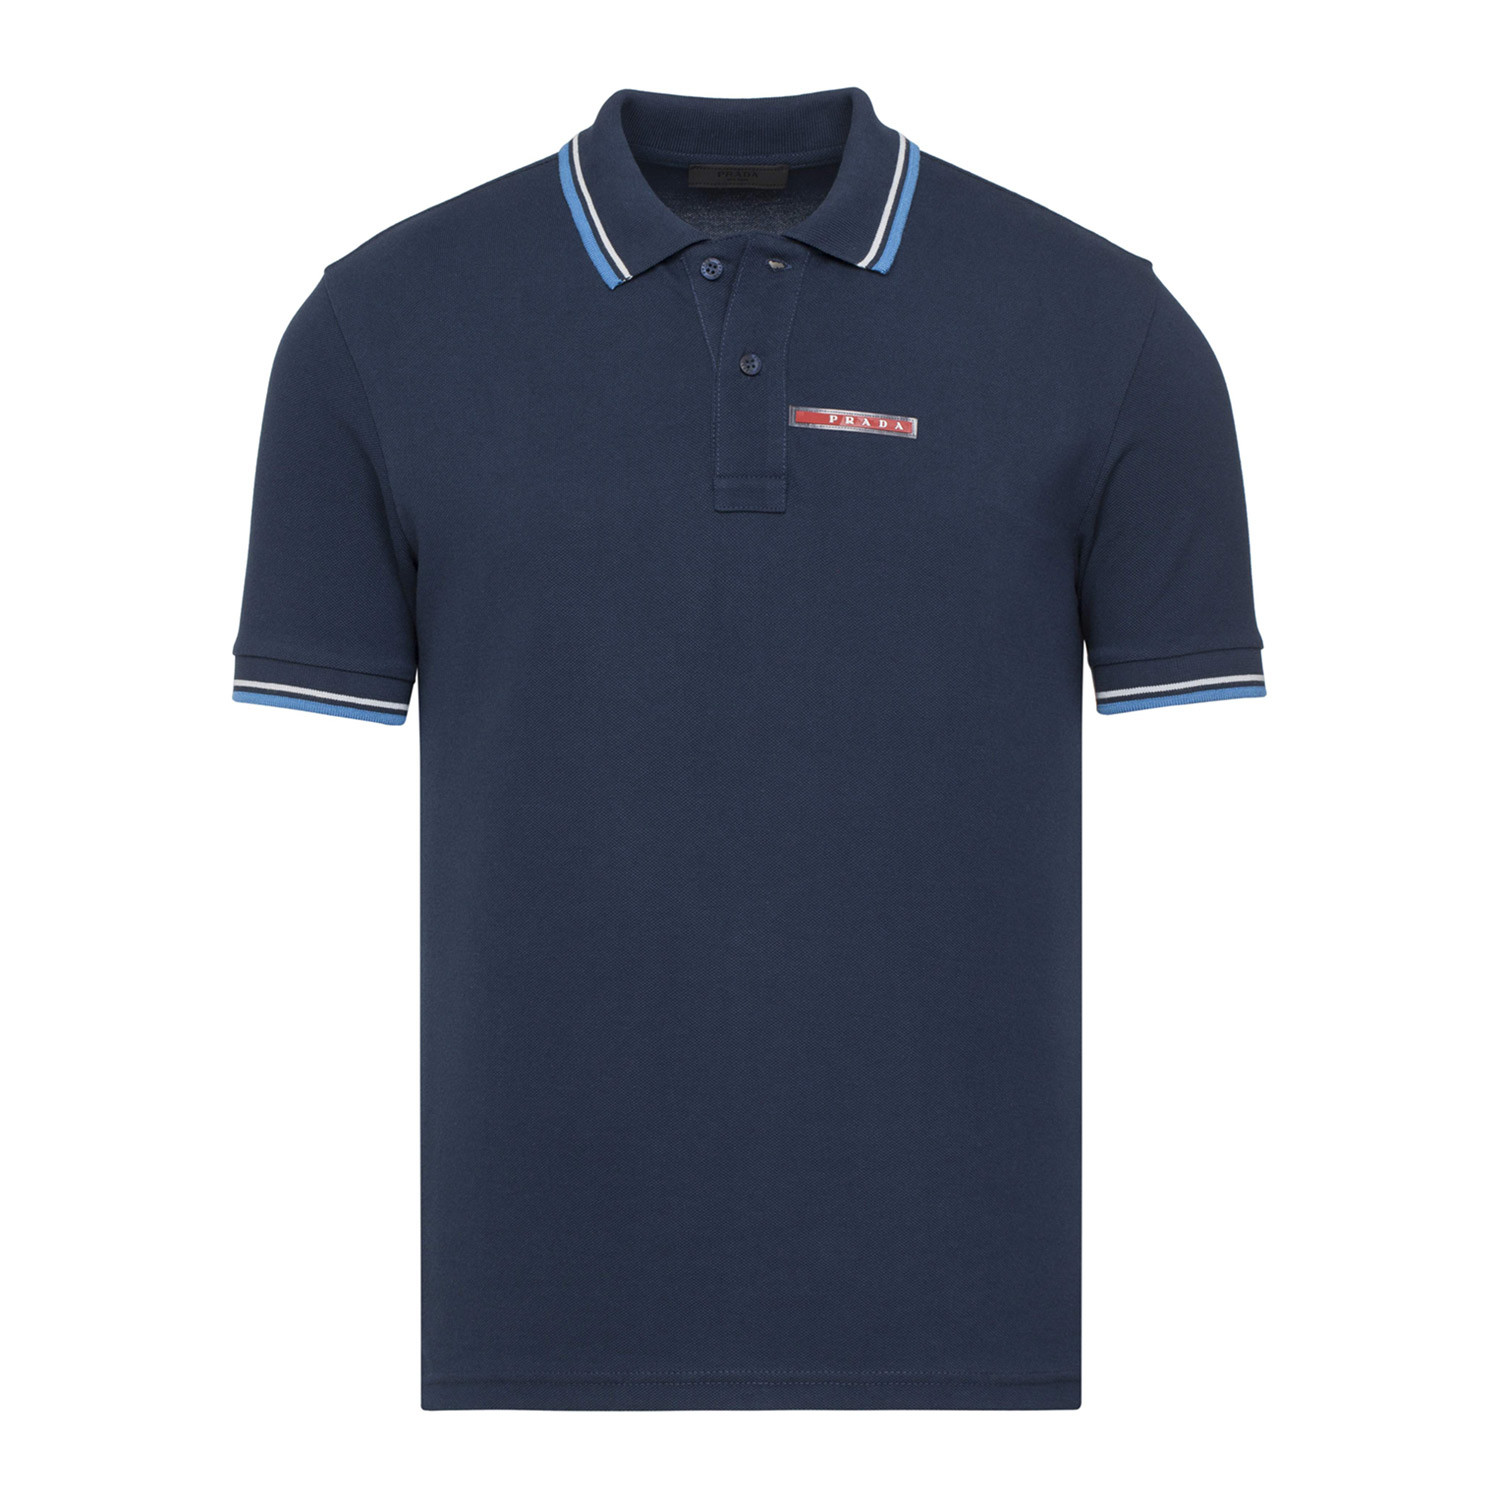 Contrast Stripe Trimmed Polo // Navy Blue (L) - Prada - Touch of Modern